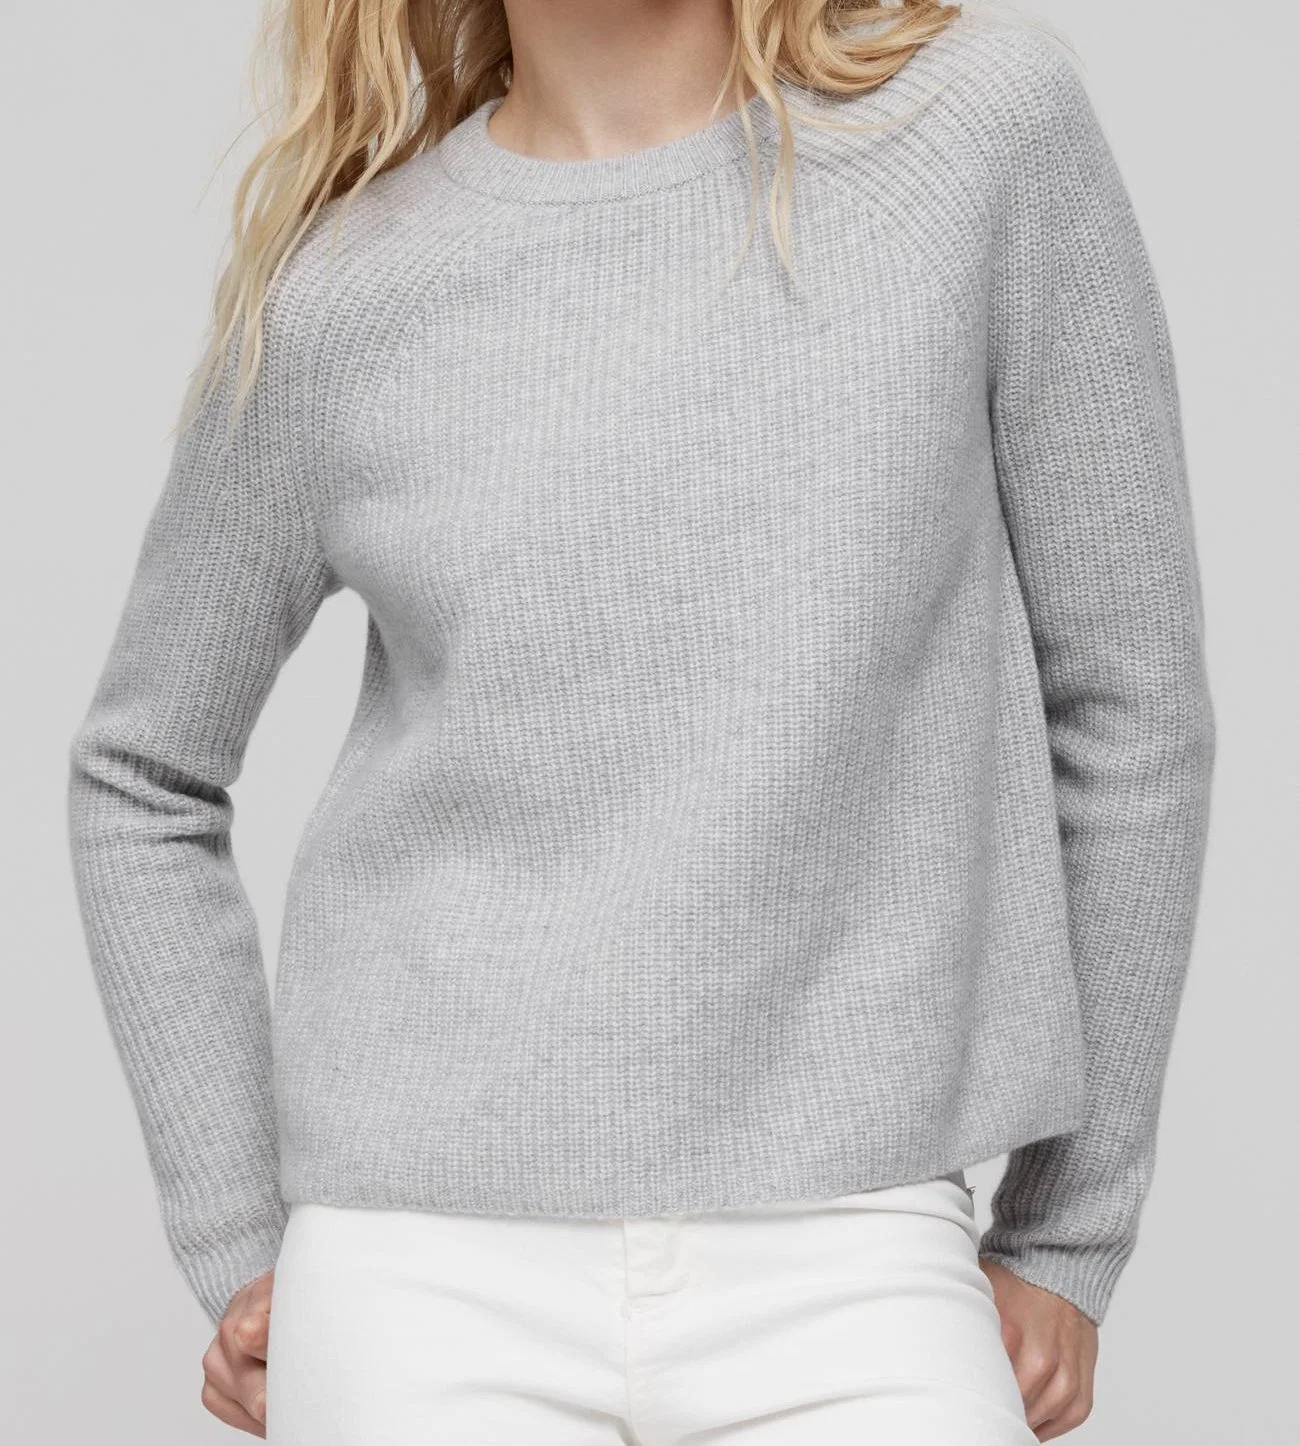 Knitted Crew Neck Ladies Ribbed Pullover Cashmere Sweater